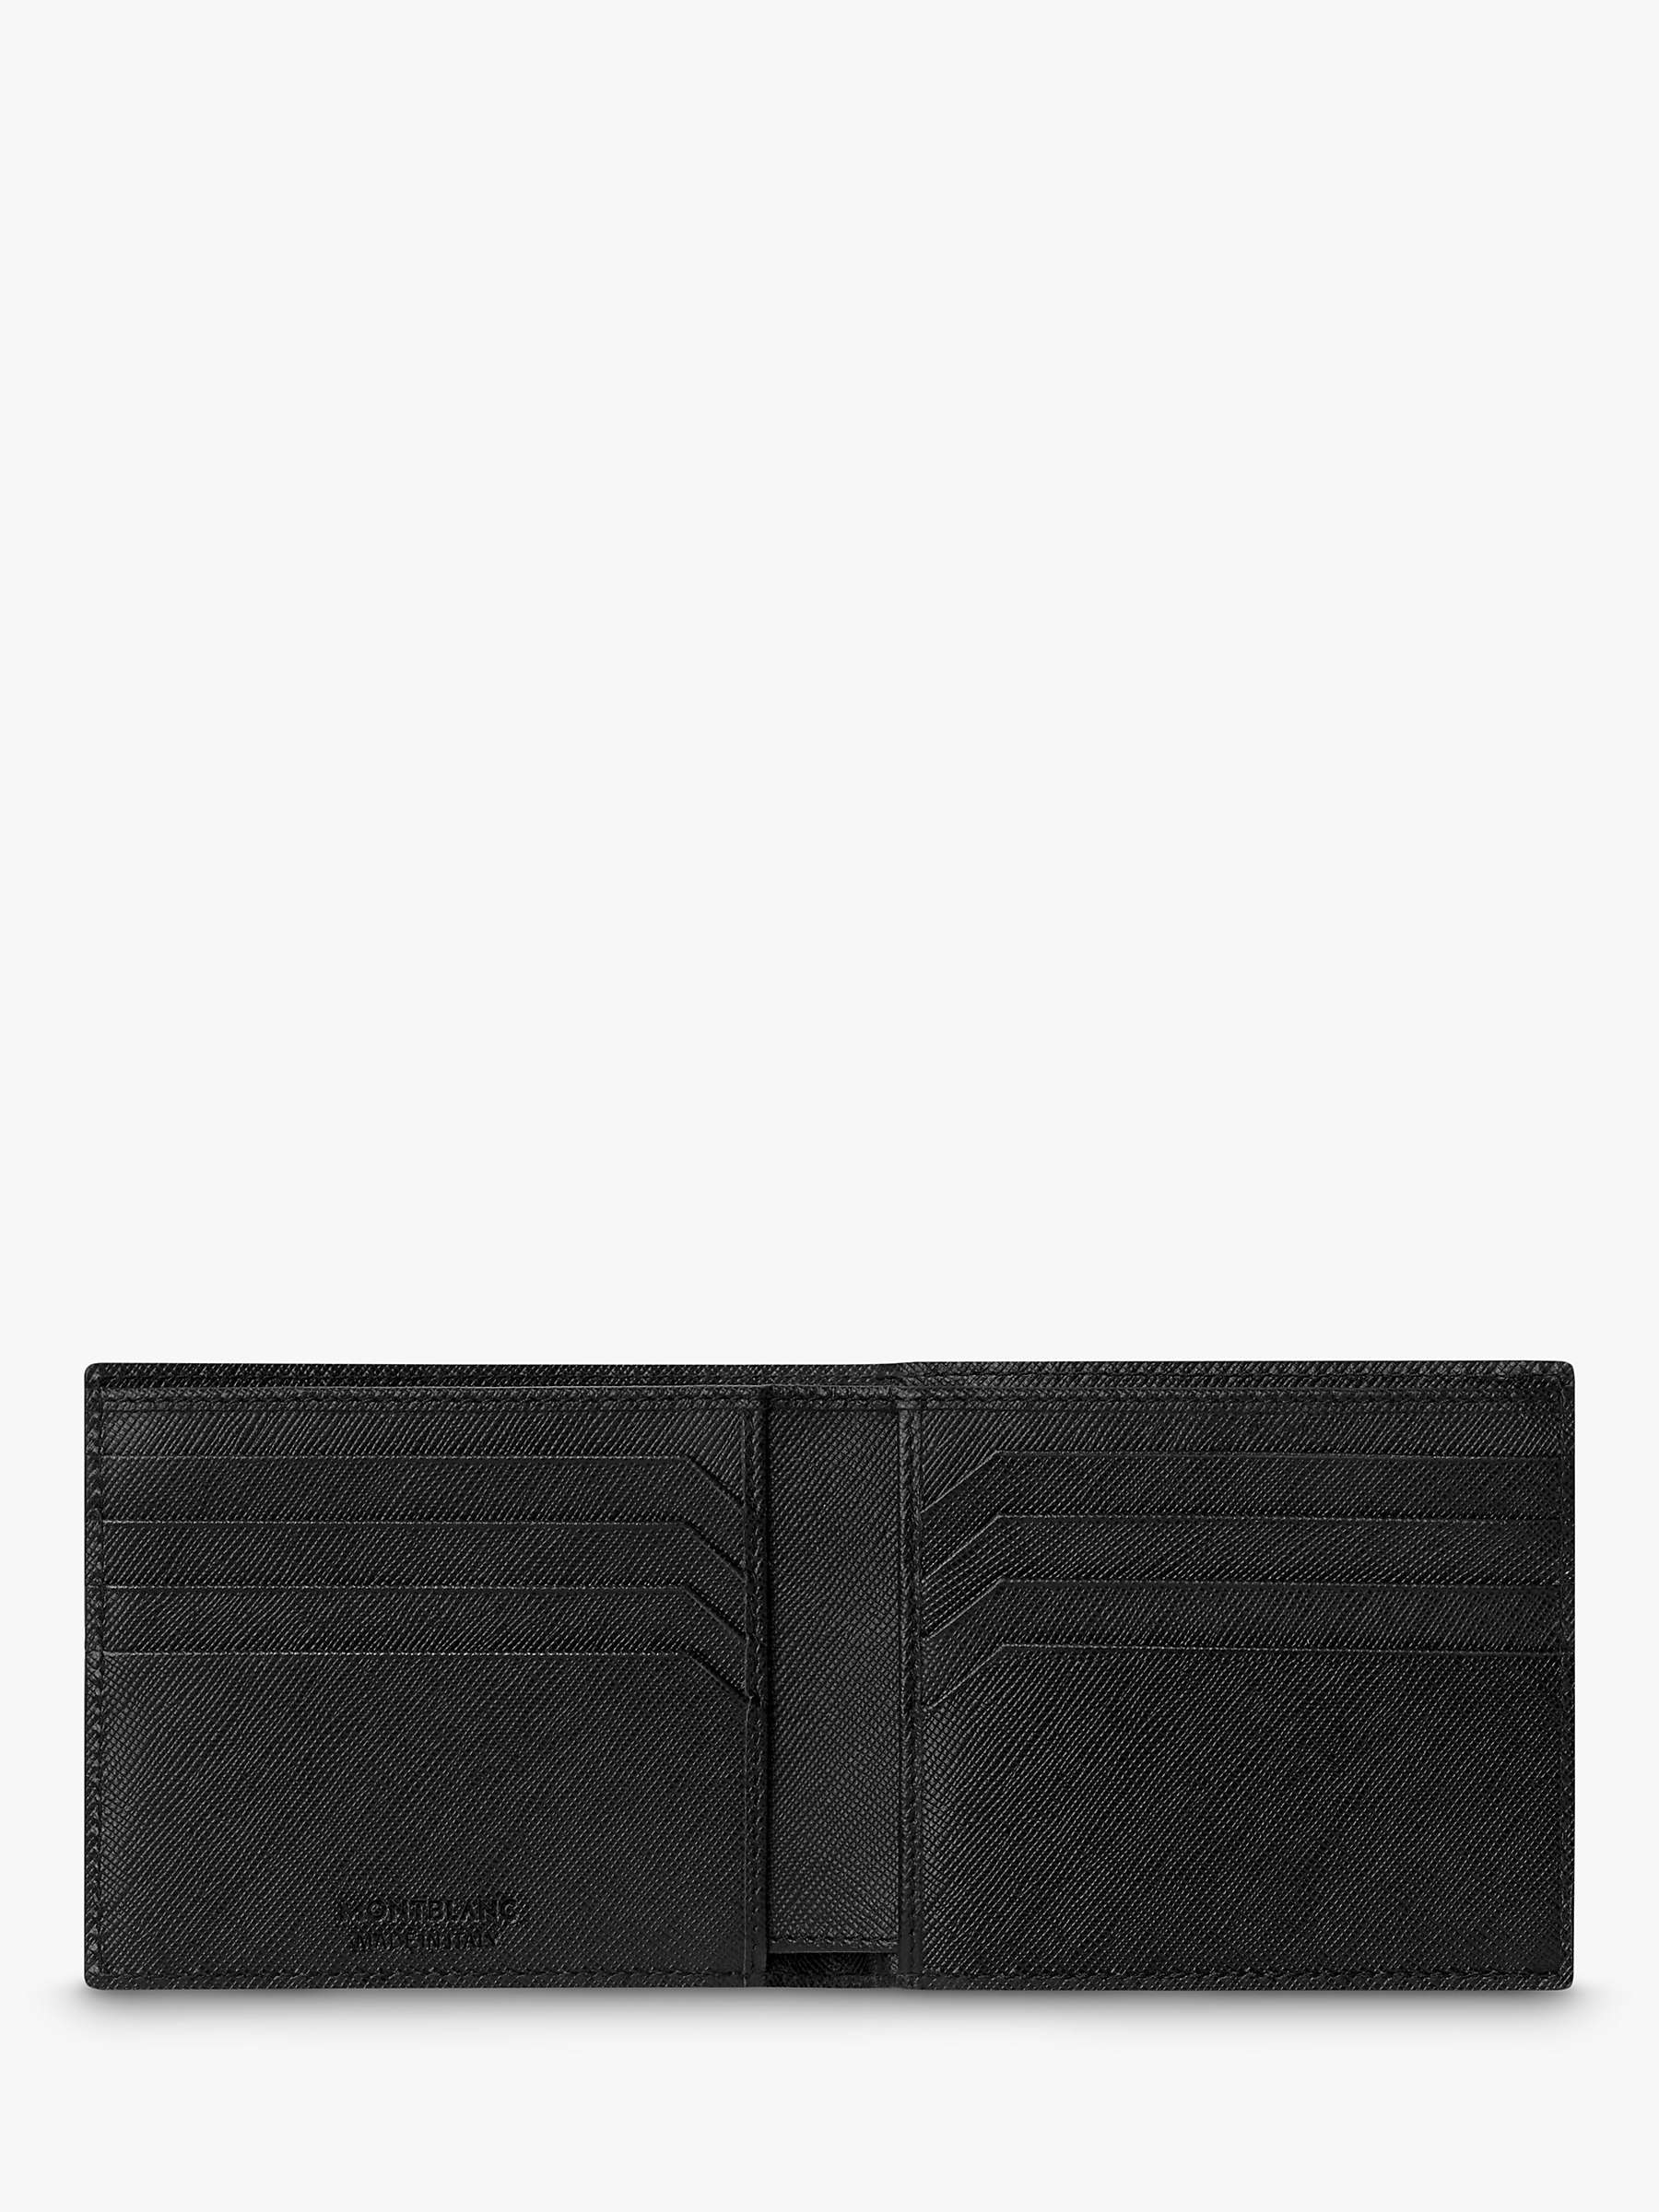 Buy Montblanc Sartorial Collection 8 Card Saffiano Leather Wallet, Black Online at johnlewis.com